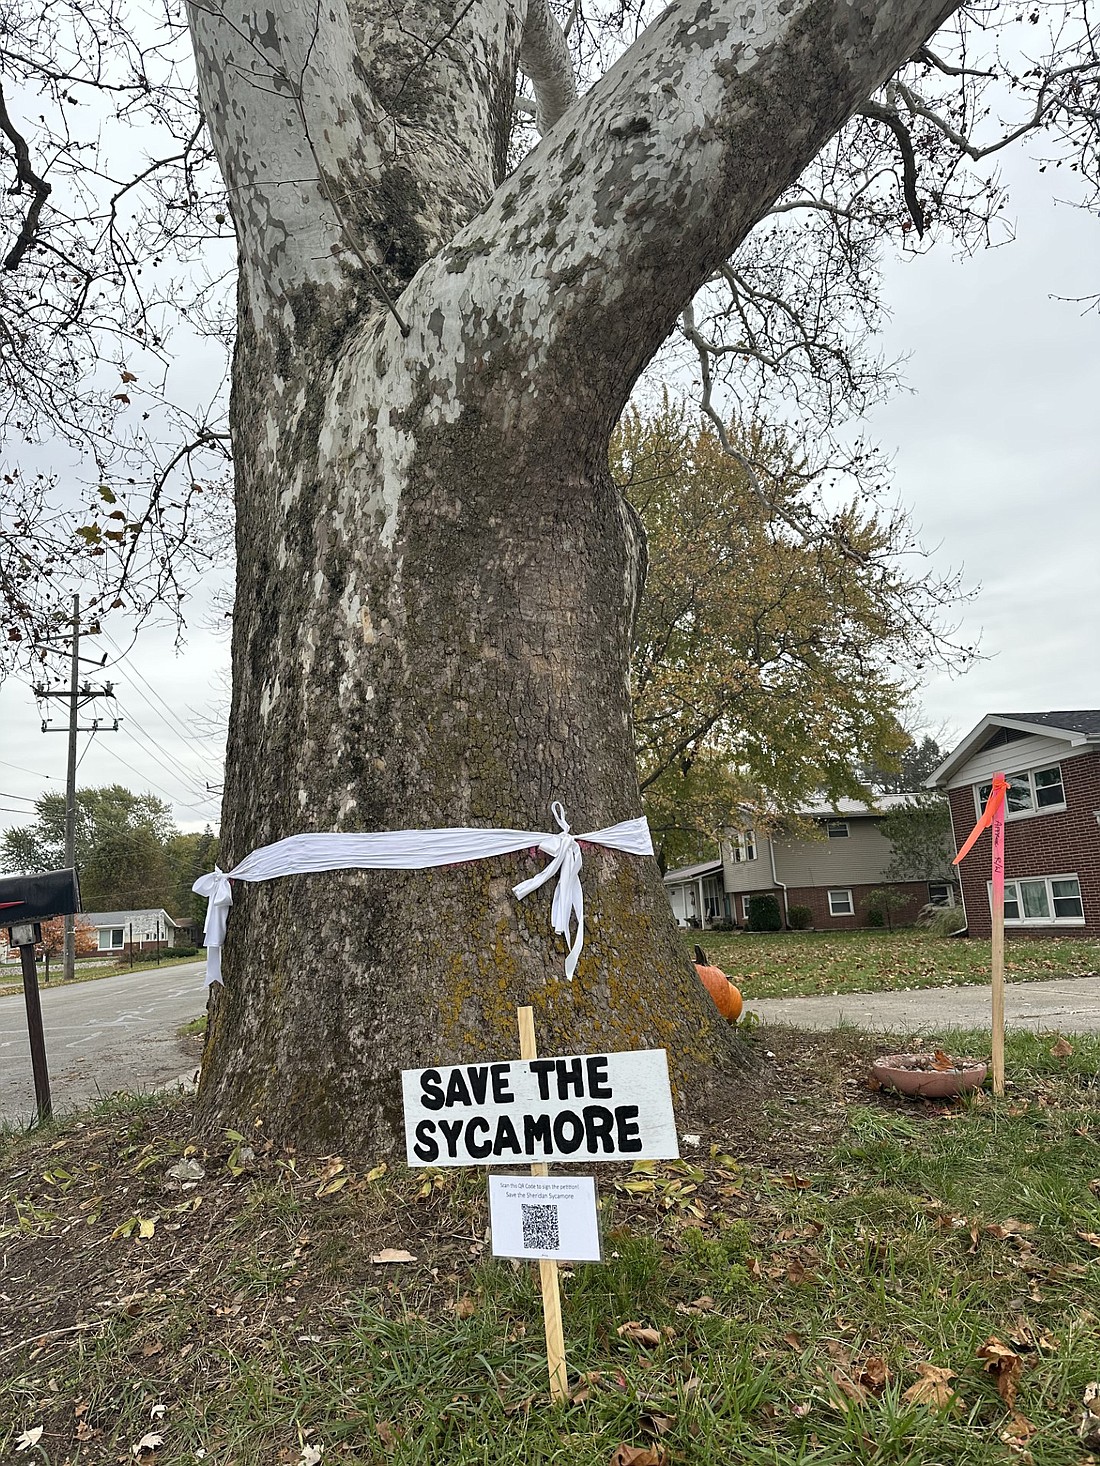 The city of Warsaw announced Friday that the centuries-old Sycamore tree at the corner of Colfax and Sheridan streets will be saved. Photo by David Slone, Times-Union